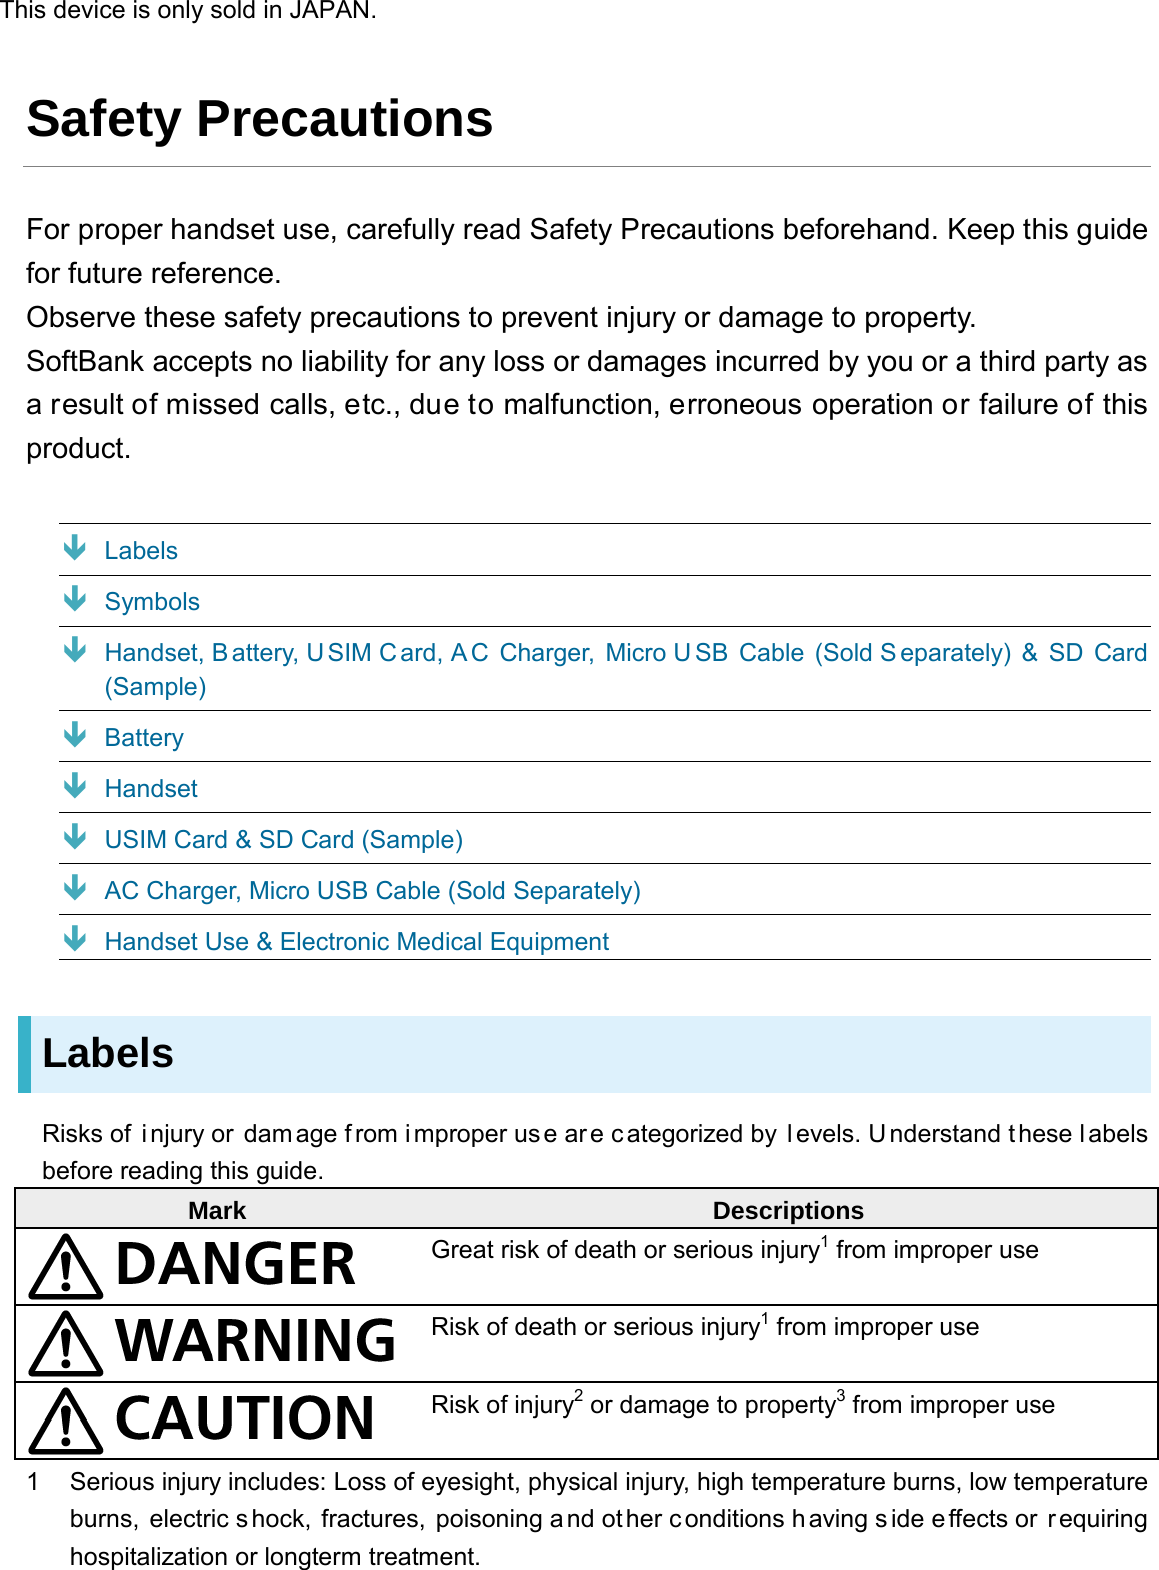 Safety Precautions For proper handset use, carefully read Safety Precautions beforehand. Keep this guide for future reference. Observe these safety precautions to prevent injury or damage to property. SoftBank accepts no liability for any loss or damages incurred by you or a third party as a result of missed calls, etc., due to malfunction, erroneous operation or failure of this product.  Labels  Symbols  Handset, Battery, U SIM Card, A C Charger,  Micro U SB Cable (Sold S eparately) &amp; SD Card (Sample)  Battery  Handset  USIM Card &amp; SD Card (Sample)  AC Charger, Micro USB Cable (Sold Separately)  Handset Use &amp; Electronic Medical Equipment Labels Risks of  i njury or  dam age f rom i mproper use ar e c ategorized by l evels. Understand these l abels before reading this guide. Mark Descriptions  Great risk of death or serious injury1 from improper use  Risk of death or serious injury1 from improper use  Risk of injury2 or damage to property3 from improper use 1  Serious injury includes: Loss of eyesight, physical injury, high temperature burns, low temperature burns, electric shock, fractures, poisoning a nd other c onditions h aving s ide effects or  r equiring hospitalization or longterm treatment. This device is only sold in JAPAN.